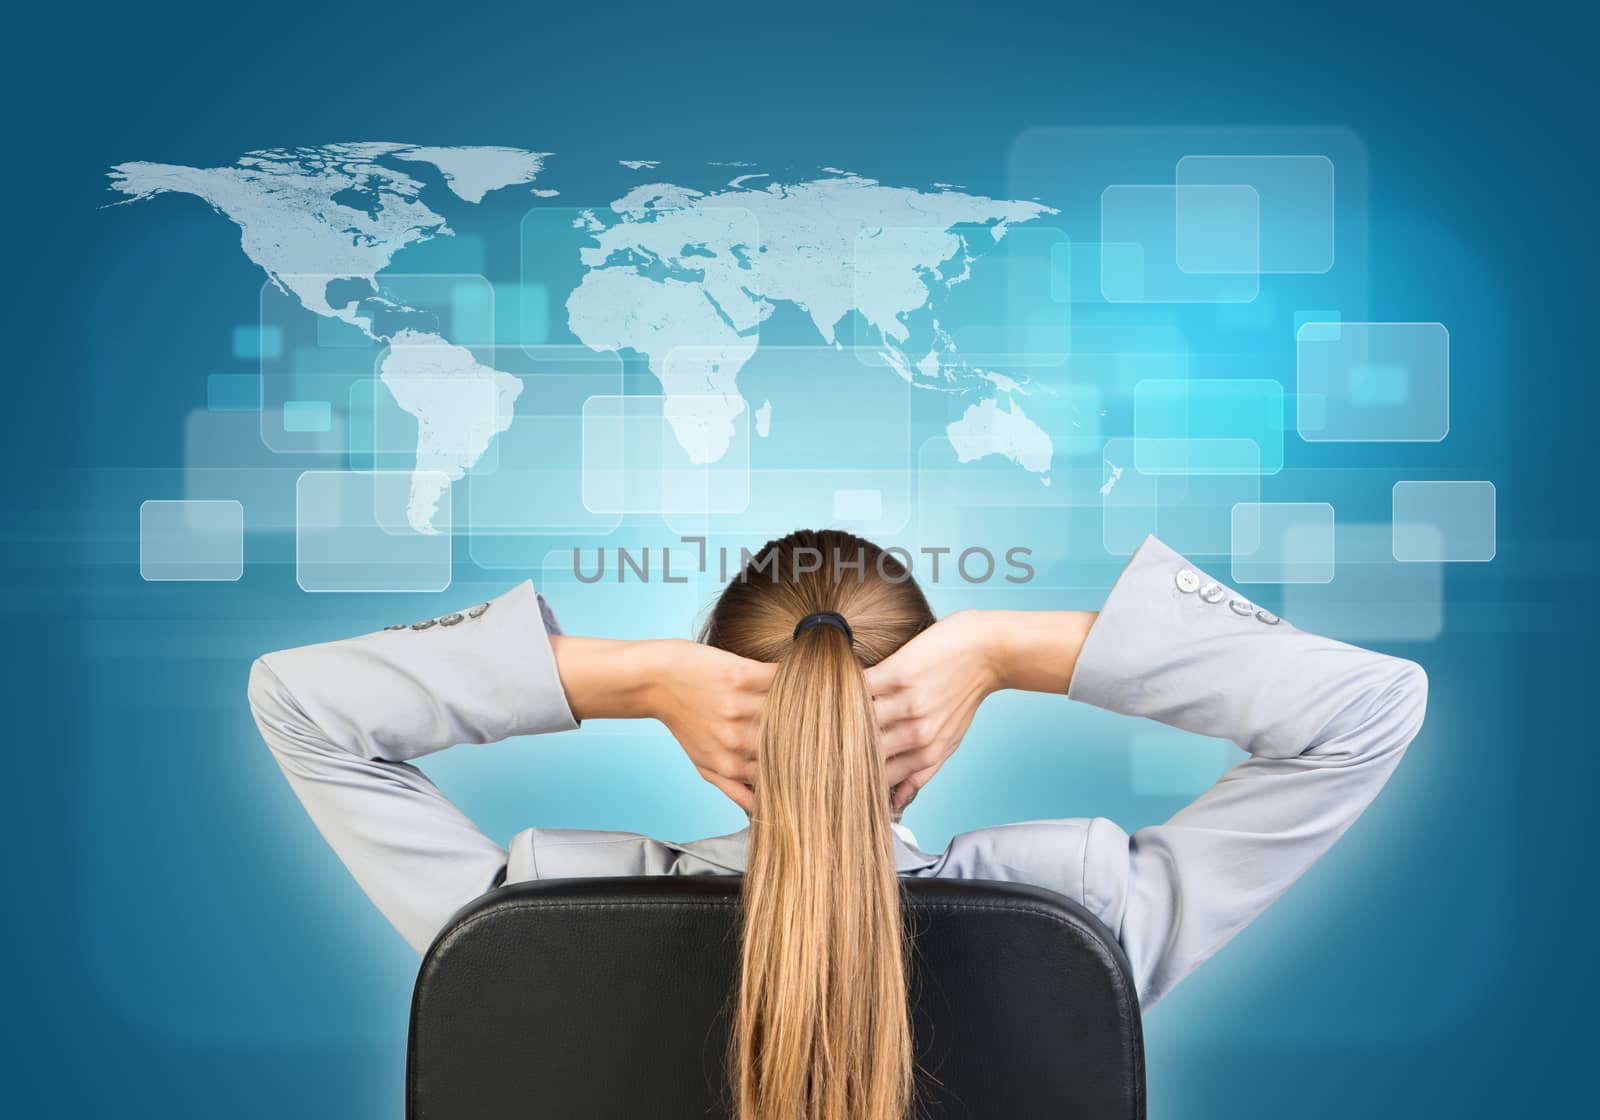 Businesswoman sitting on office chair with hands clasped behind her head, in front of world map and transparent rectangles